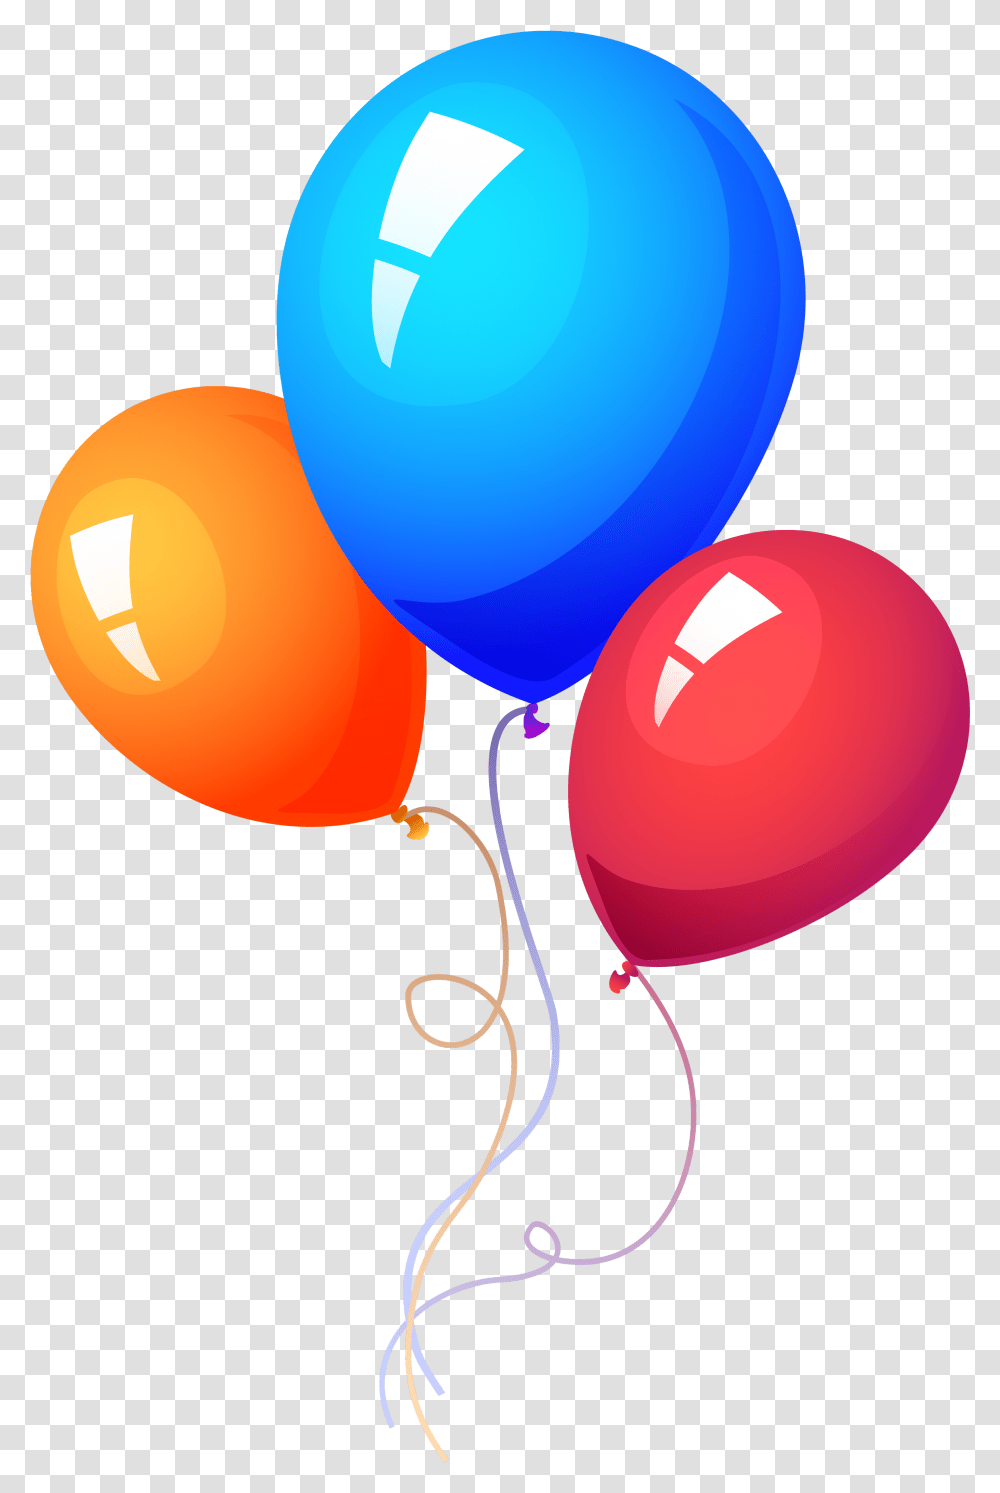 Party Ballons Background Balloon Transparent Png